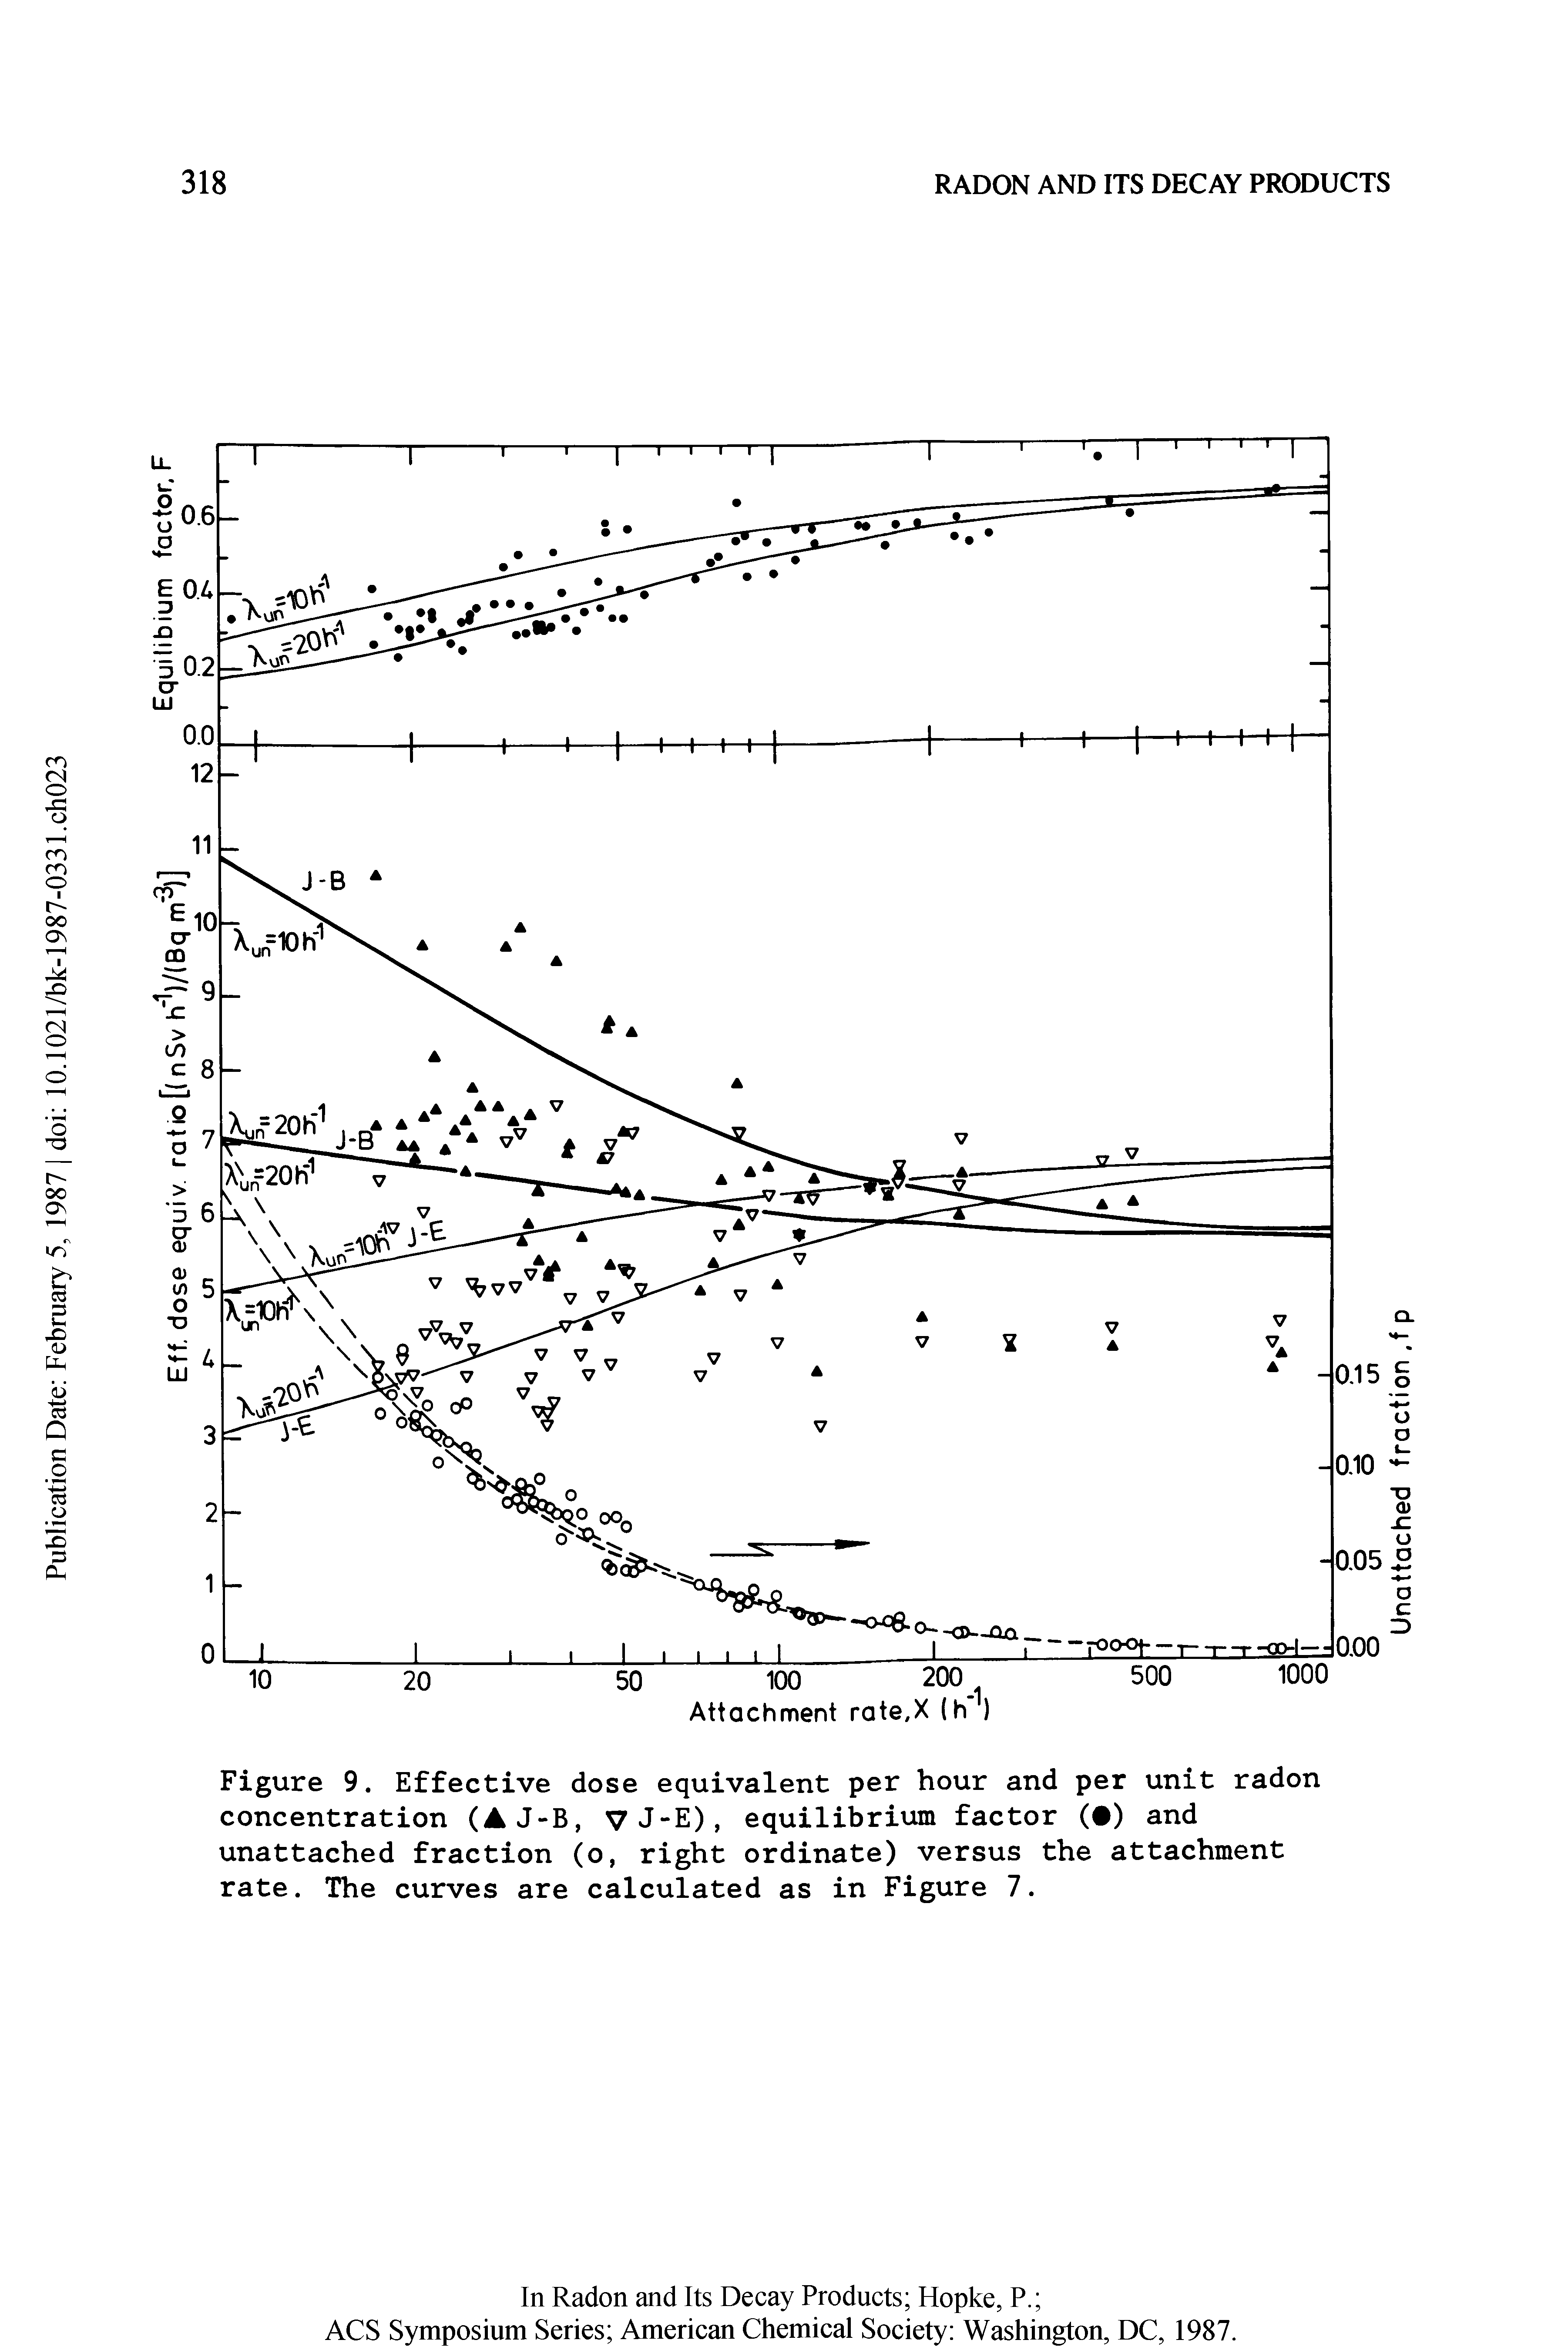 Figure 9. Effective dose equivalent per hour and per unit radon concentration (A J-B, V J-E), equilibrium factor ( ) and unattached fraction (o, right ordinate) versus the attachment rate. The curves are calculated as in Figure 7.